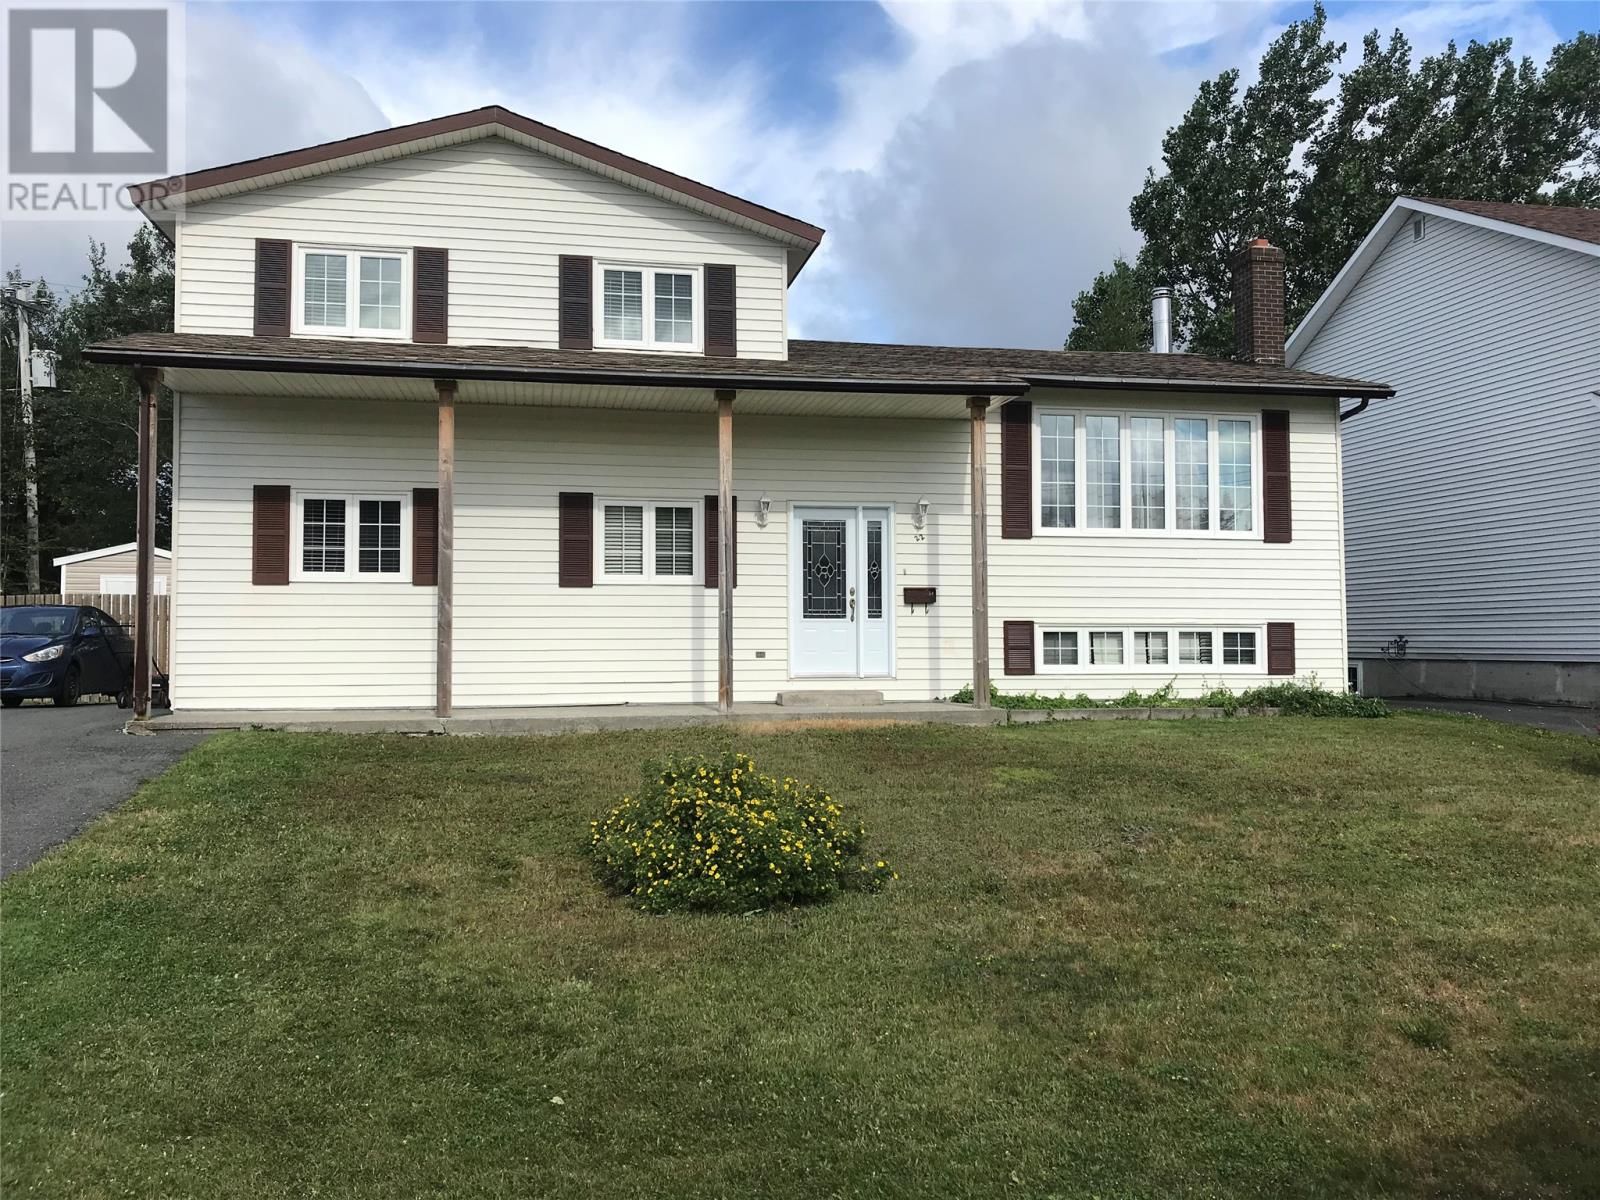 Main Photo: 22 Collishaw Crescent in Gander: House for sale : MLS®# 1257177